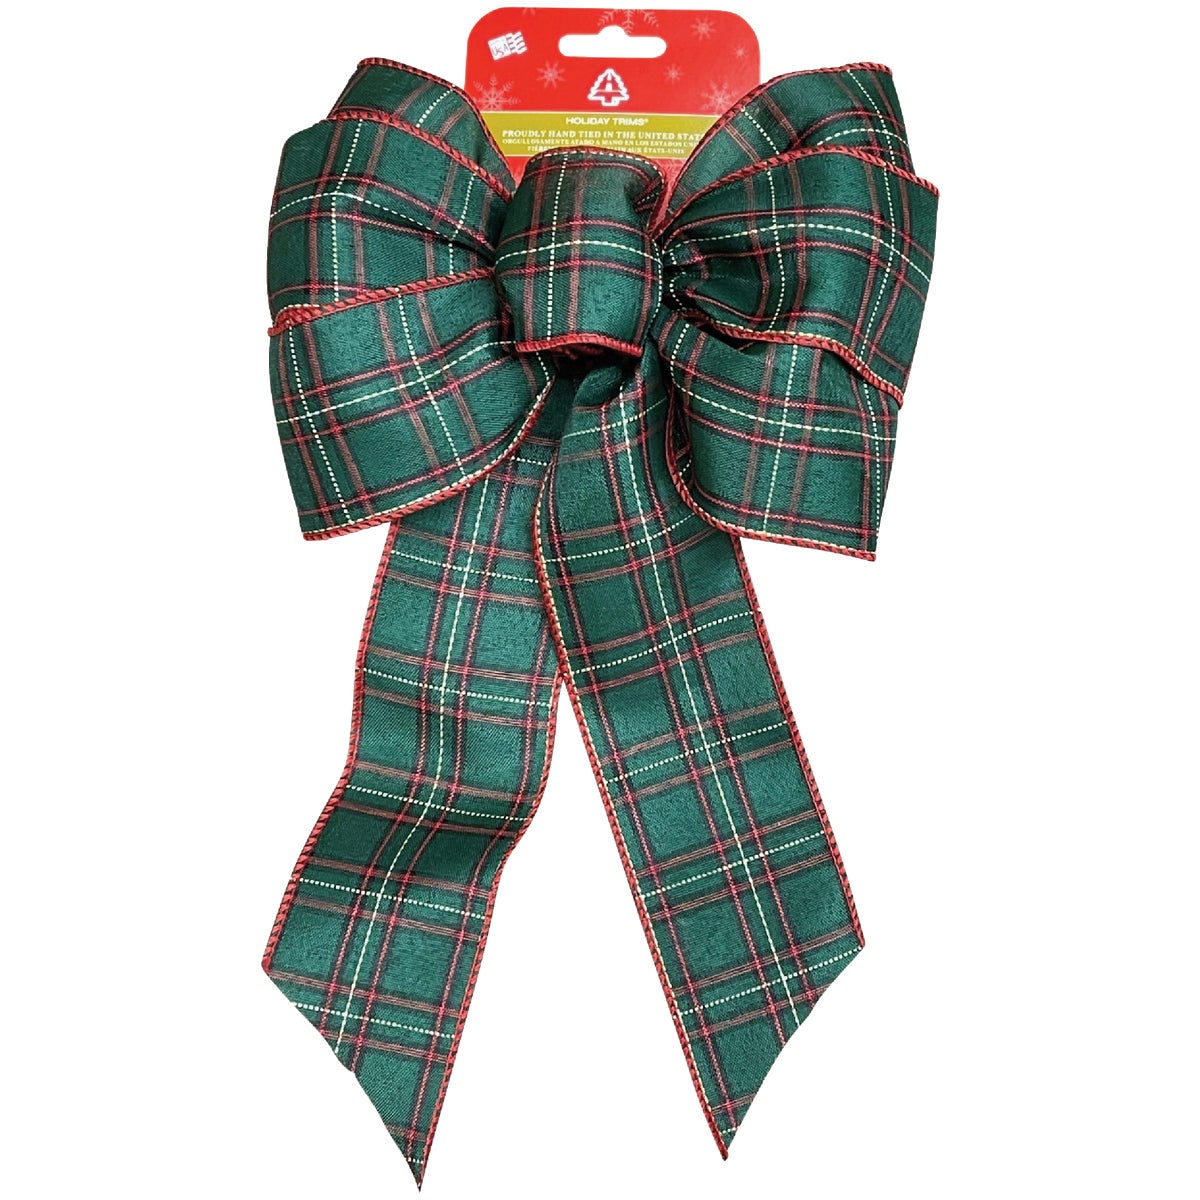 Holiday Trims 6156 Holiday Trims 7-Loop 8.5 In. W. x 14 In. L. Red/Green/Beige Plaid Christmas Bow 6156 Pack of 12